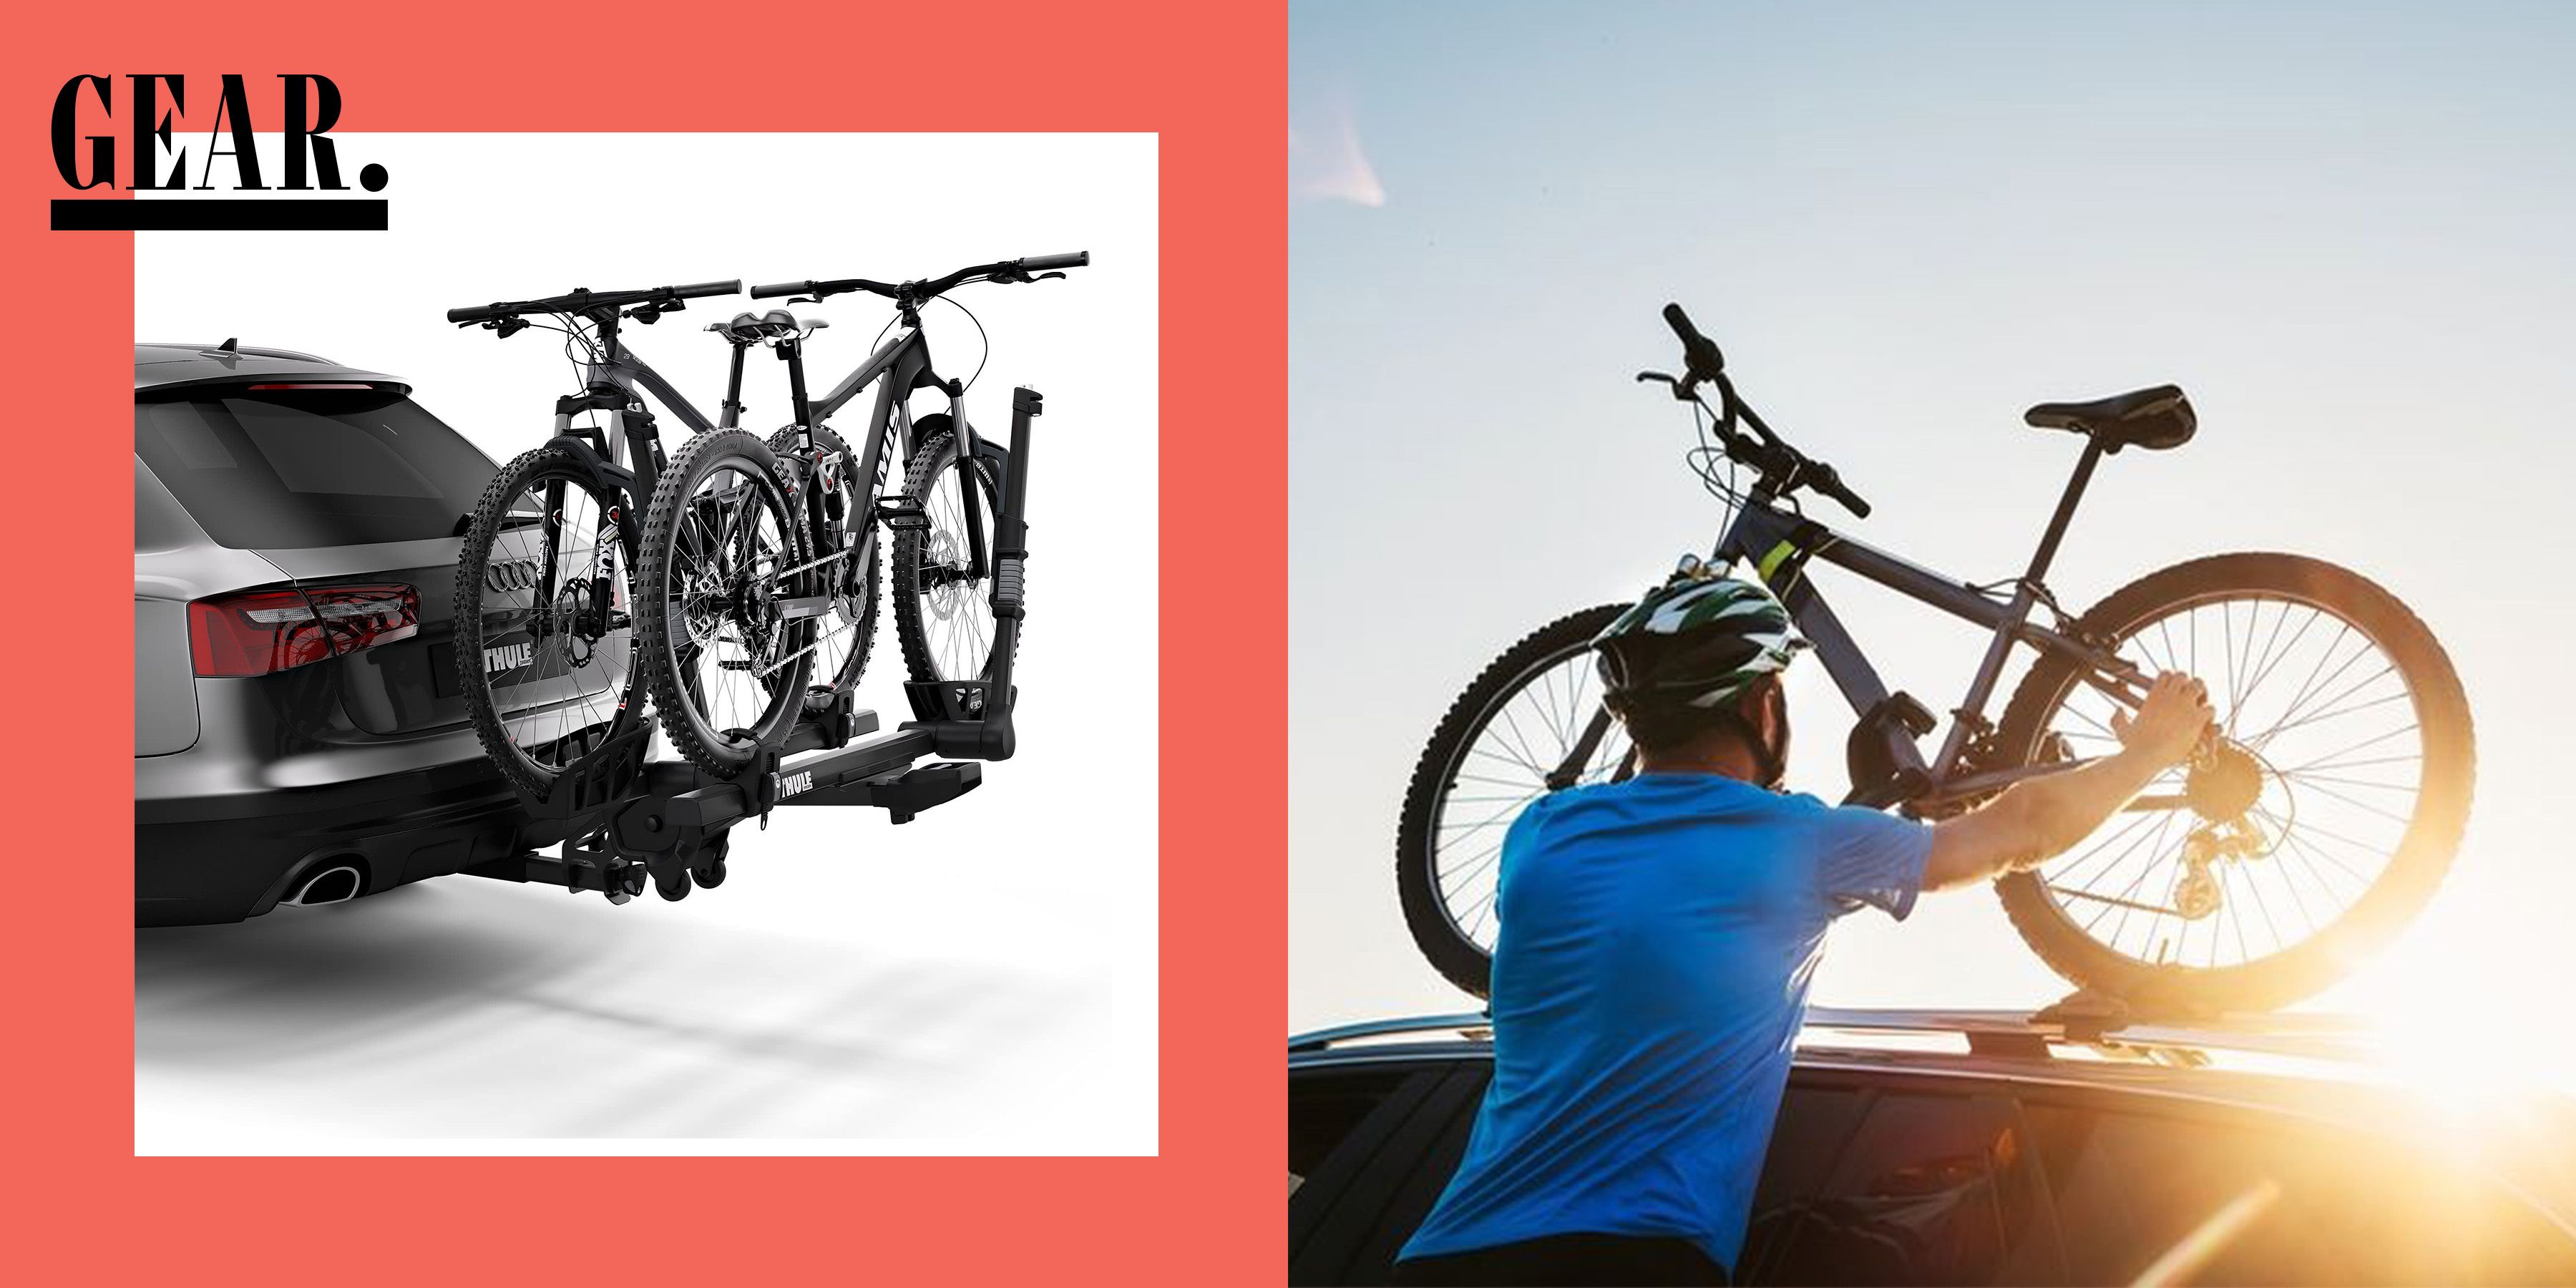 Take Your Bike on Your Next Road Trip (or Just Escape for the Weekend) with One of These Top Bike Racks for Cars & Trucks